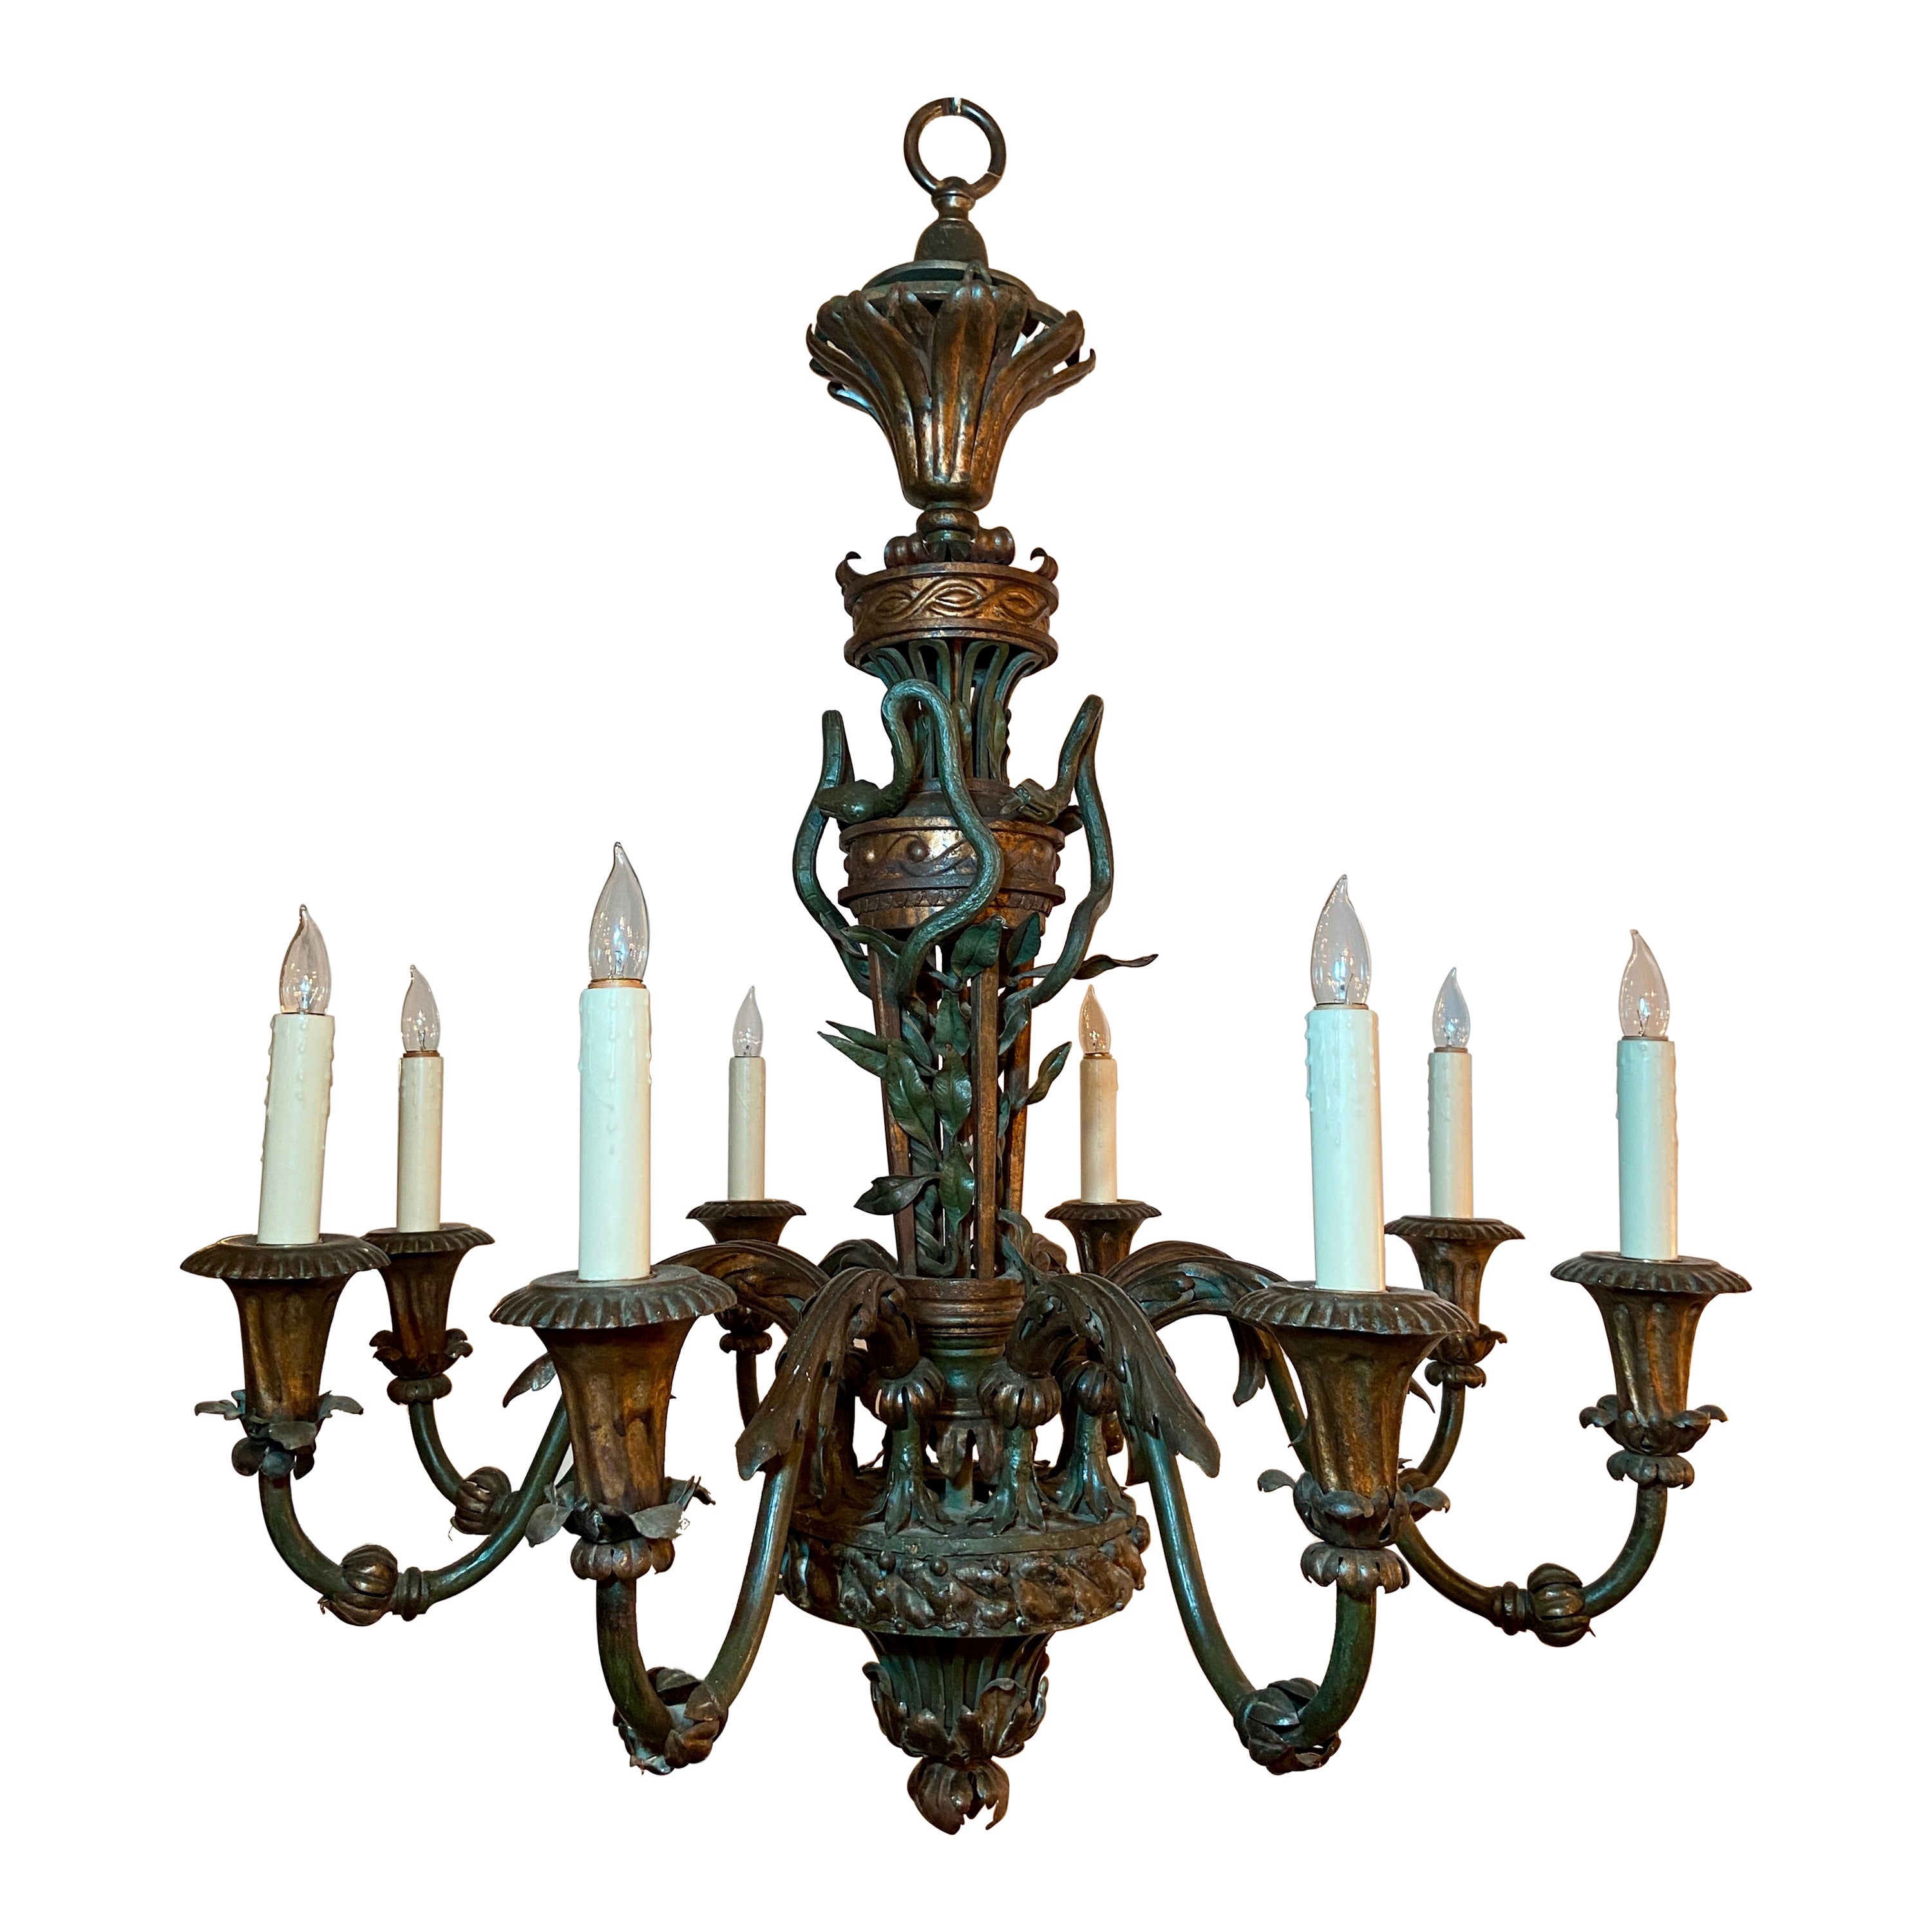 Antique 19th Century French Wrought Iron Chandelier, Circa 1840